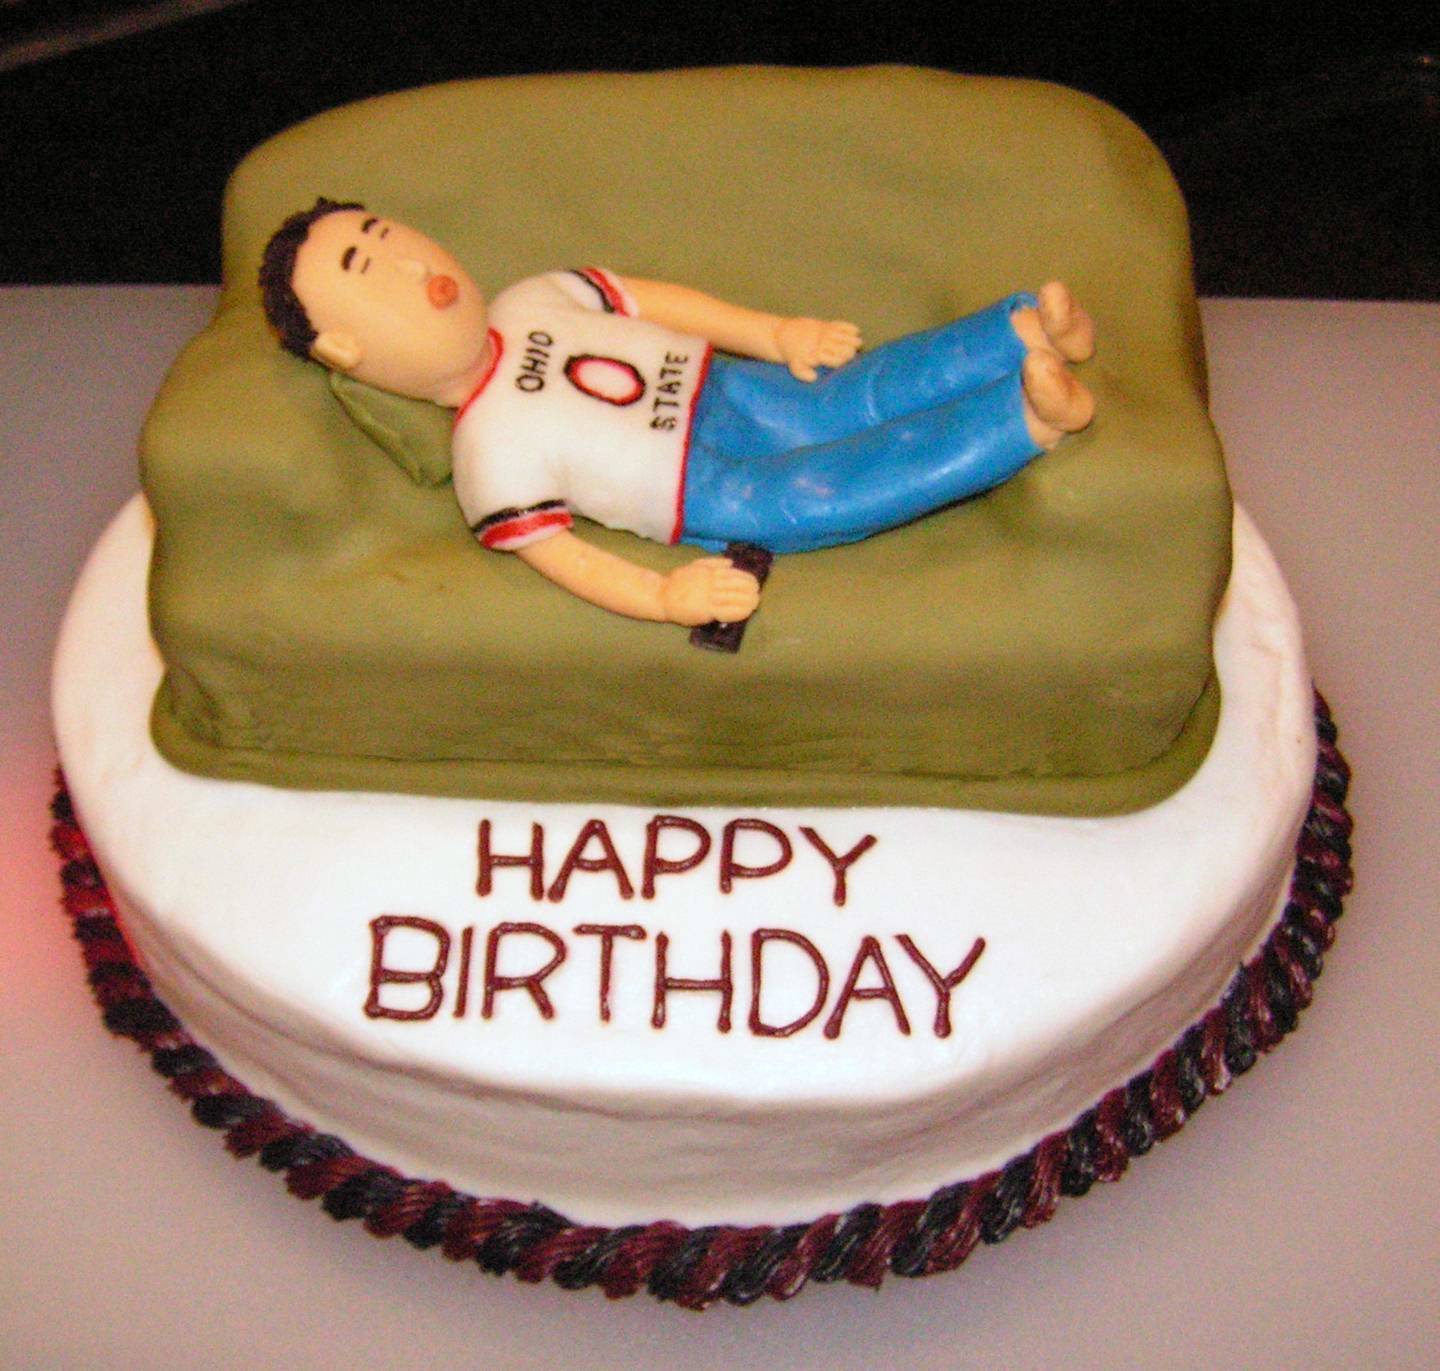 Special Birthday Cakes For Husband | www.imgkid.com - The ...